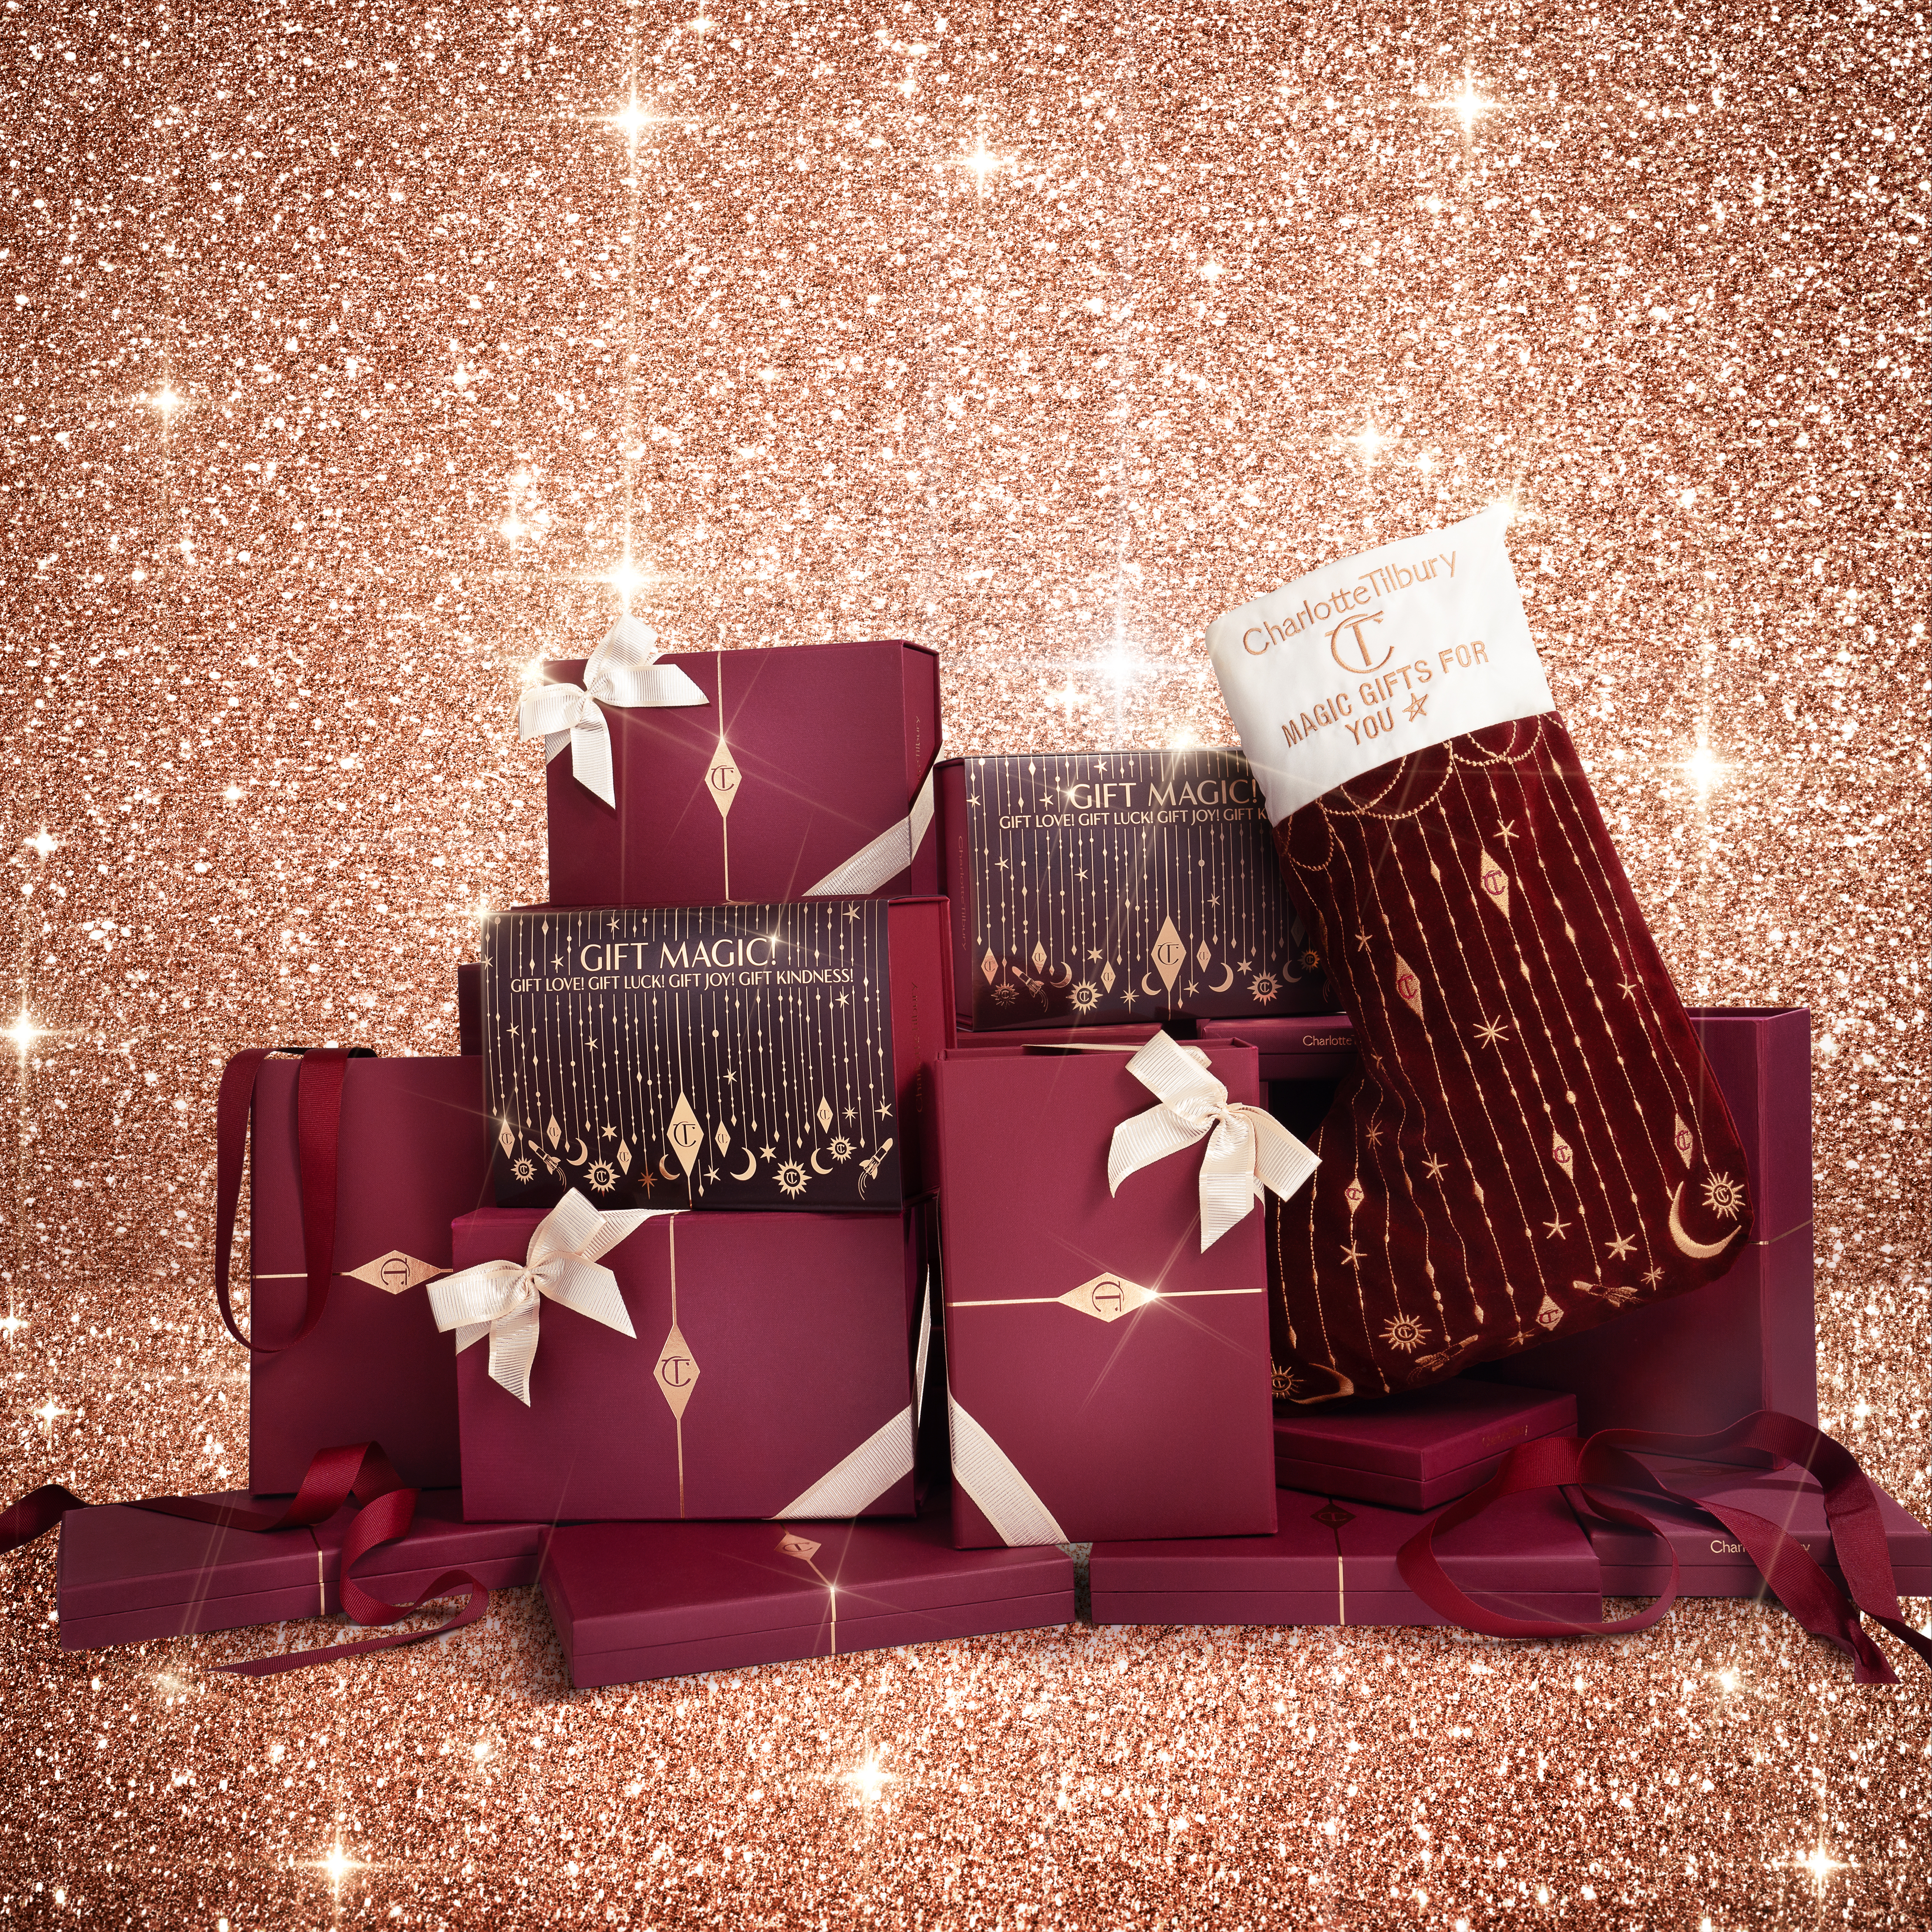 Charlotte Tilbury's embellished holiday stockings and night crimson gift boxes are perfect for hiding away stocking fillers